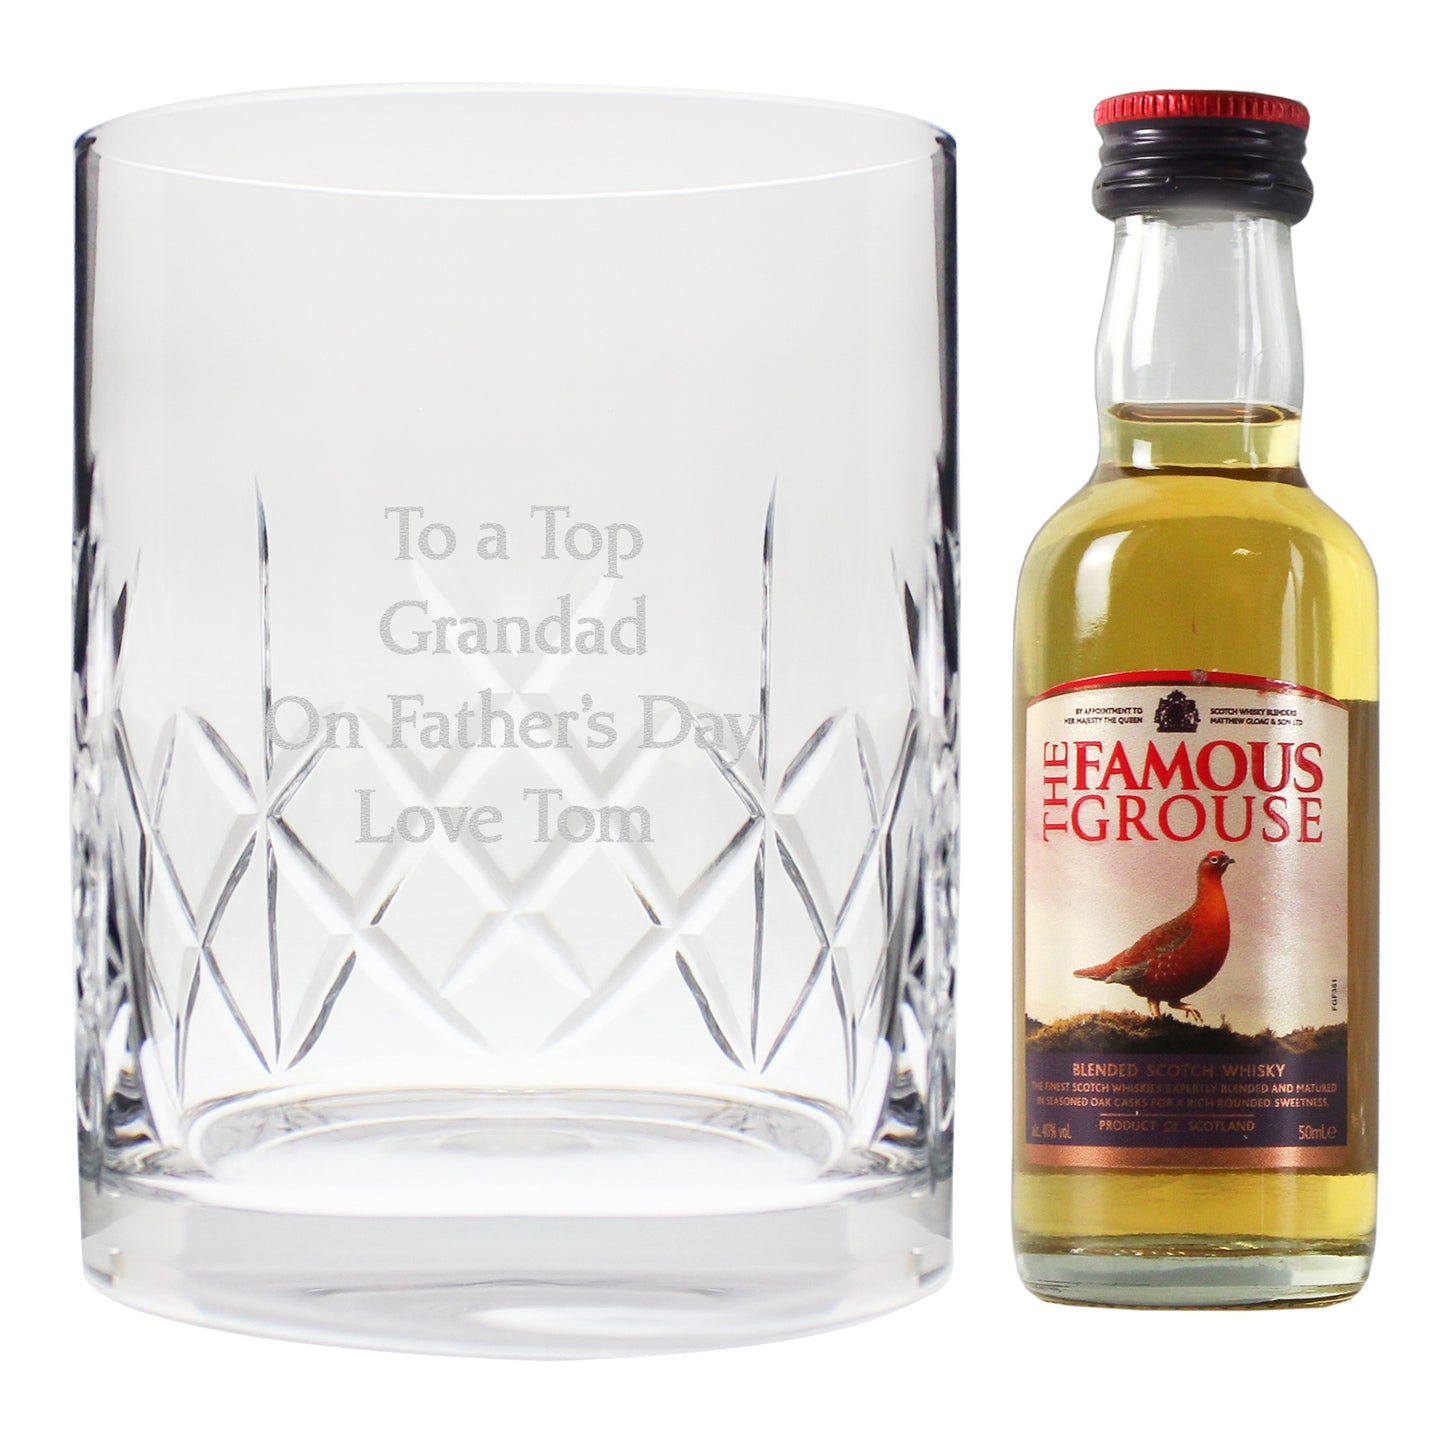 Personalised Cut Crystal & Whisky Gift Set - Personalise It!